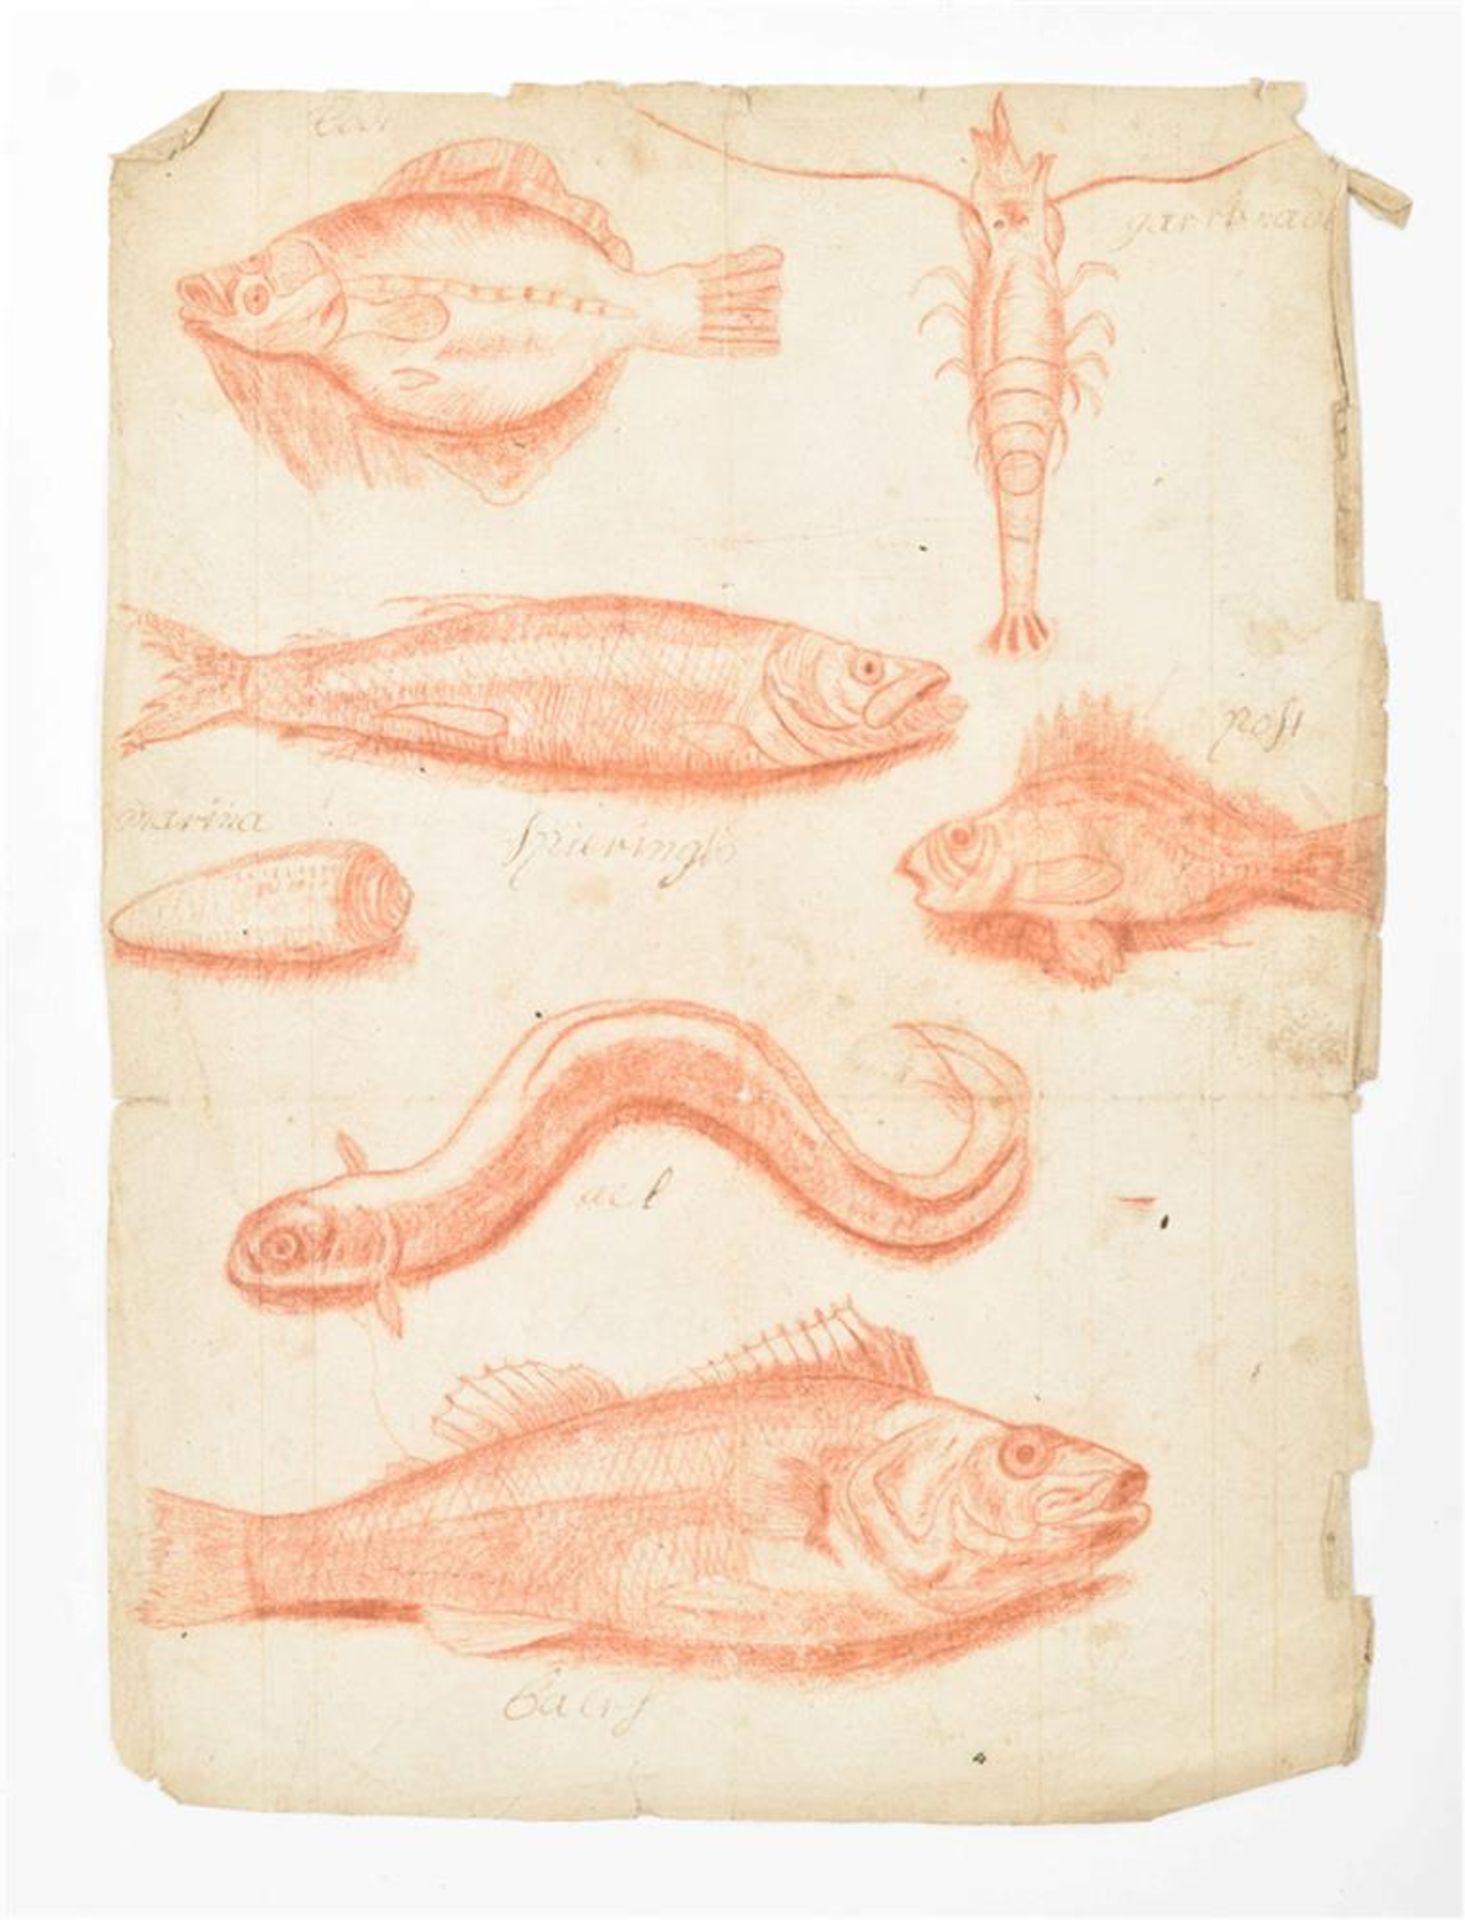 [Ichthyology] Bruyn, N. de (after). Drawings of fishes